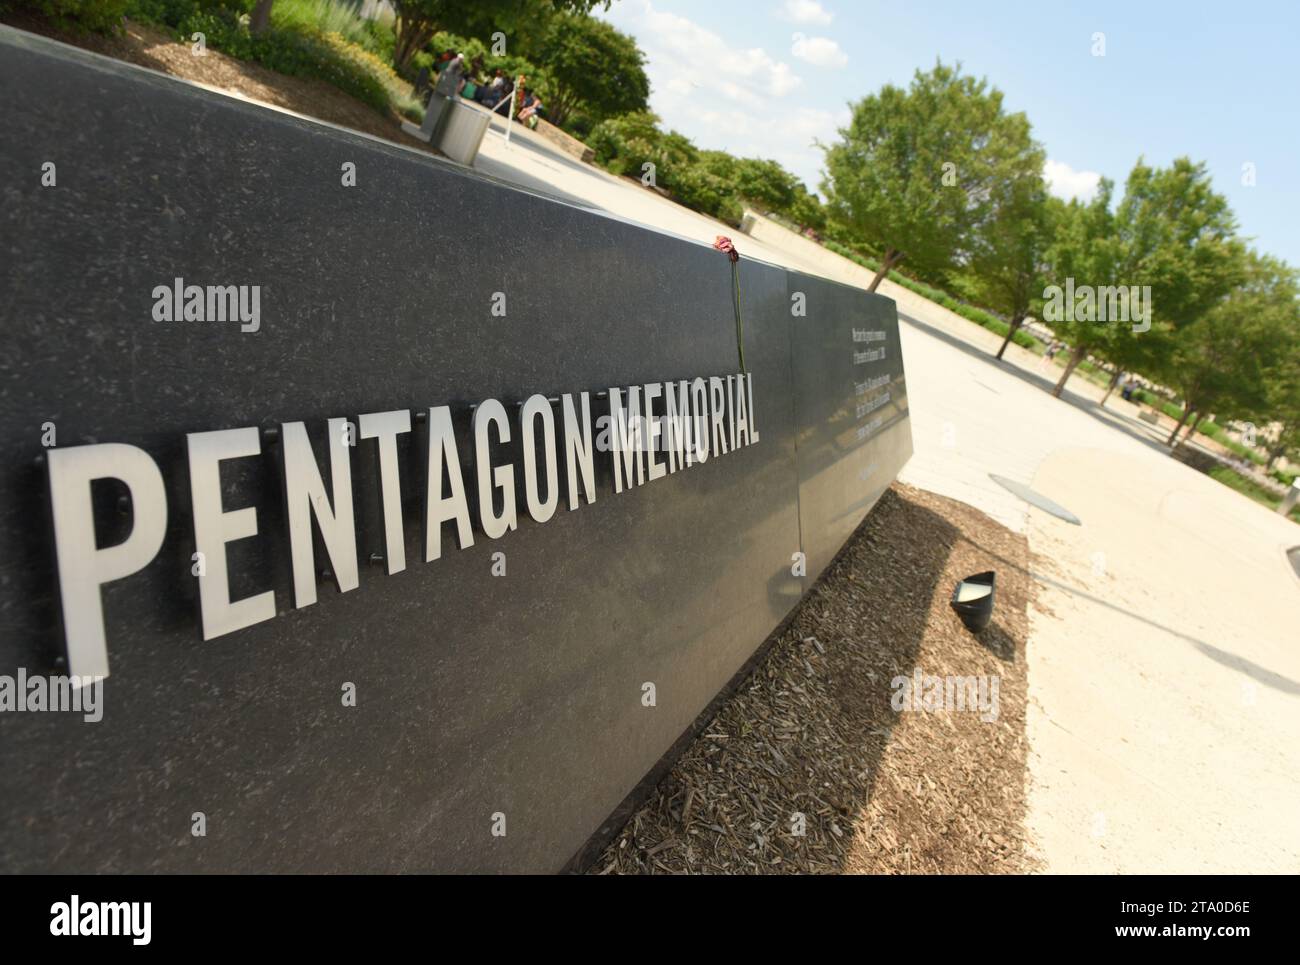 Washington, DC - June 01, 2018: Pentagon Memorial dedicated to the victims of the September 11, 2001 attack. Stock Photo